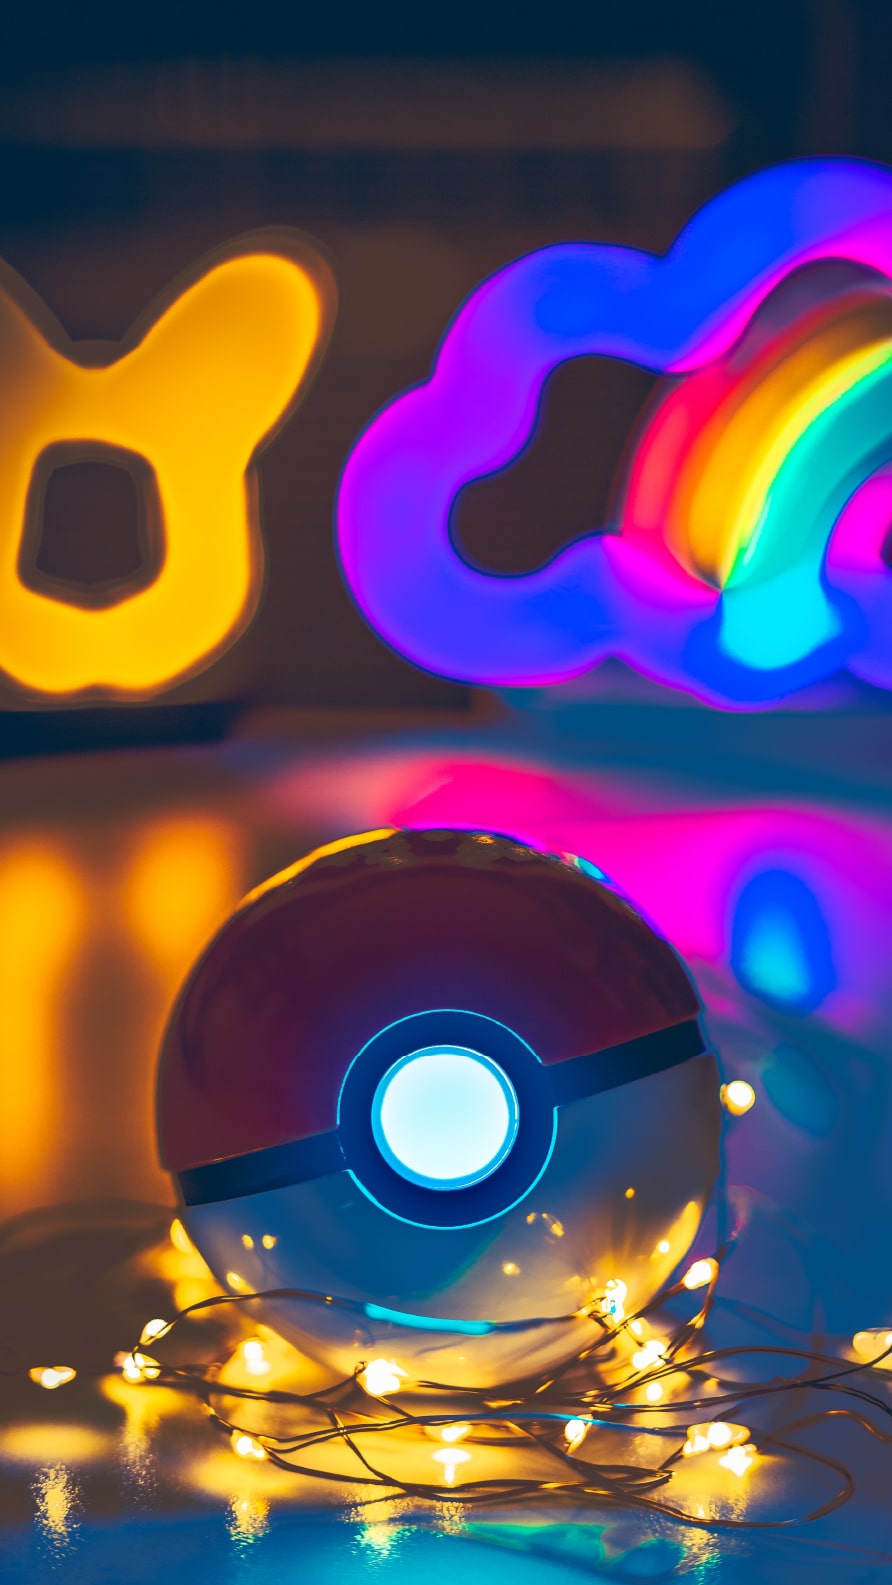 iPhone wallpapers featuring Pokémon